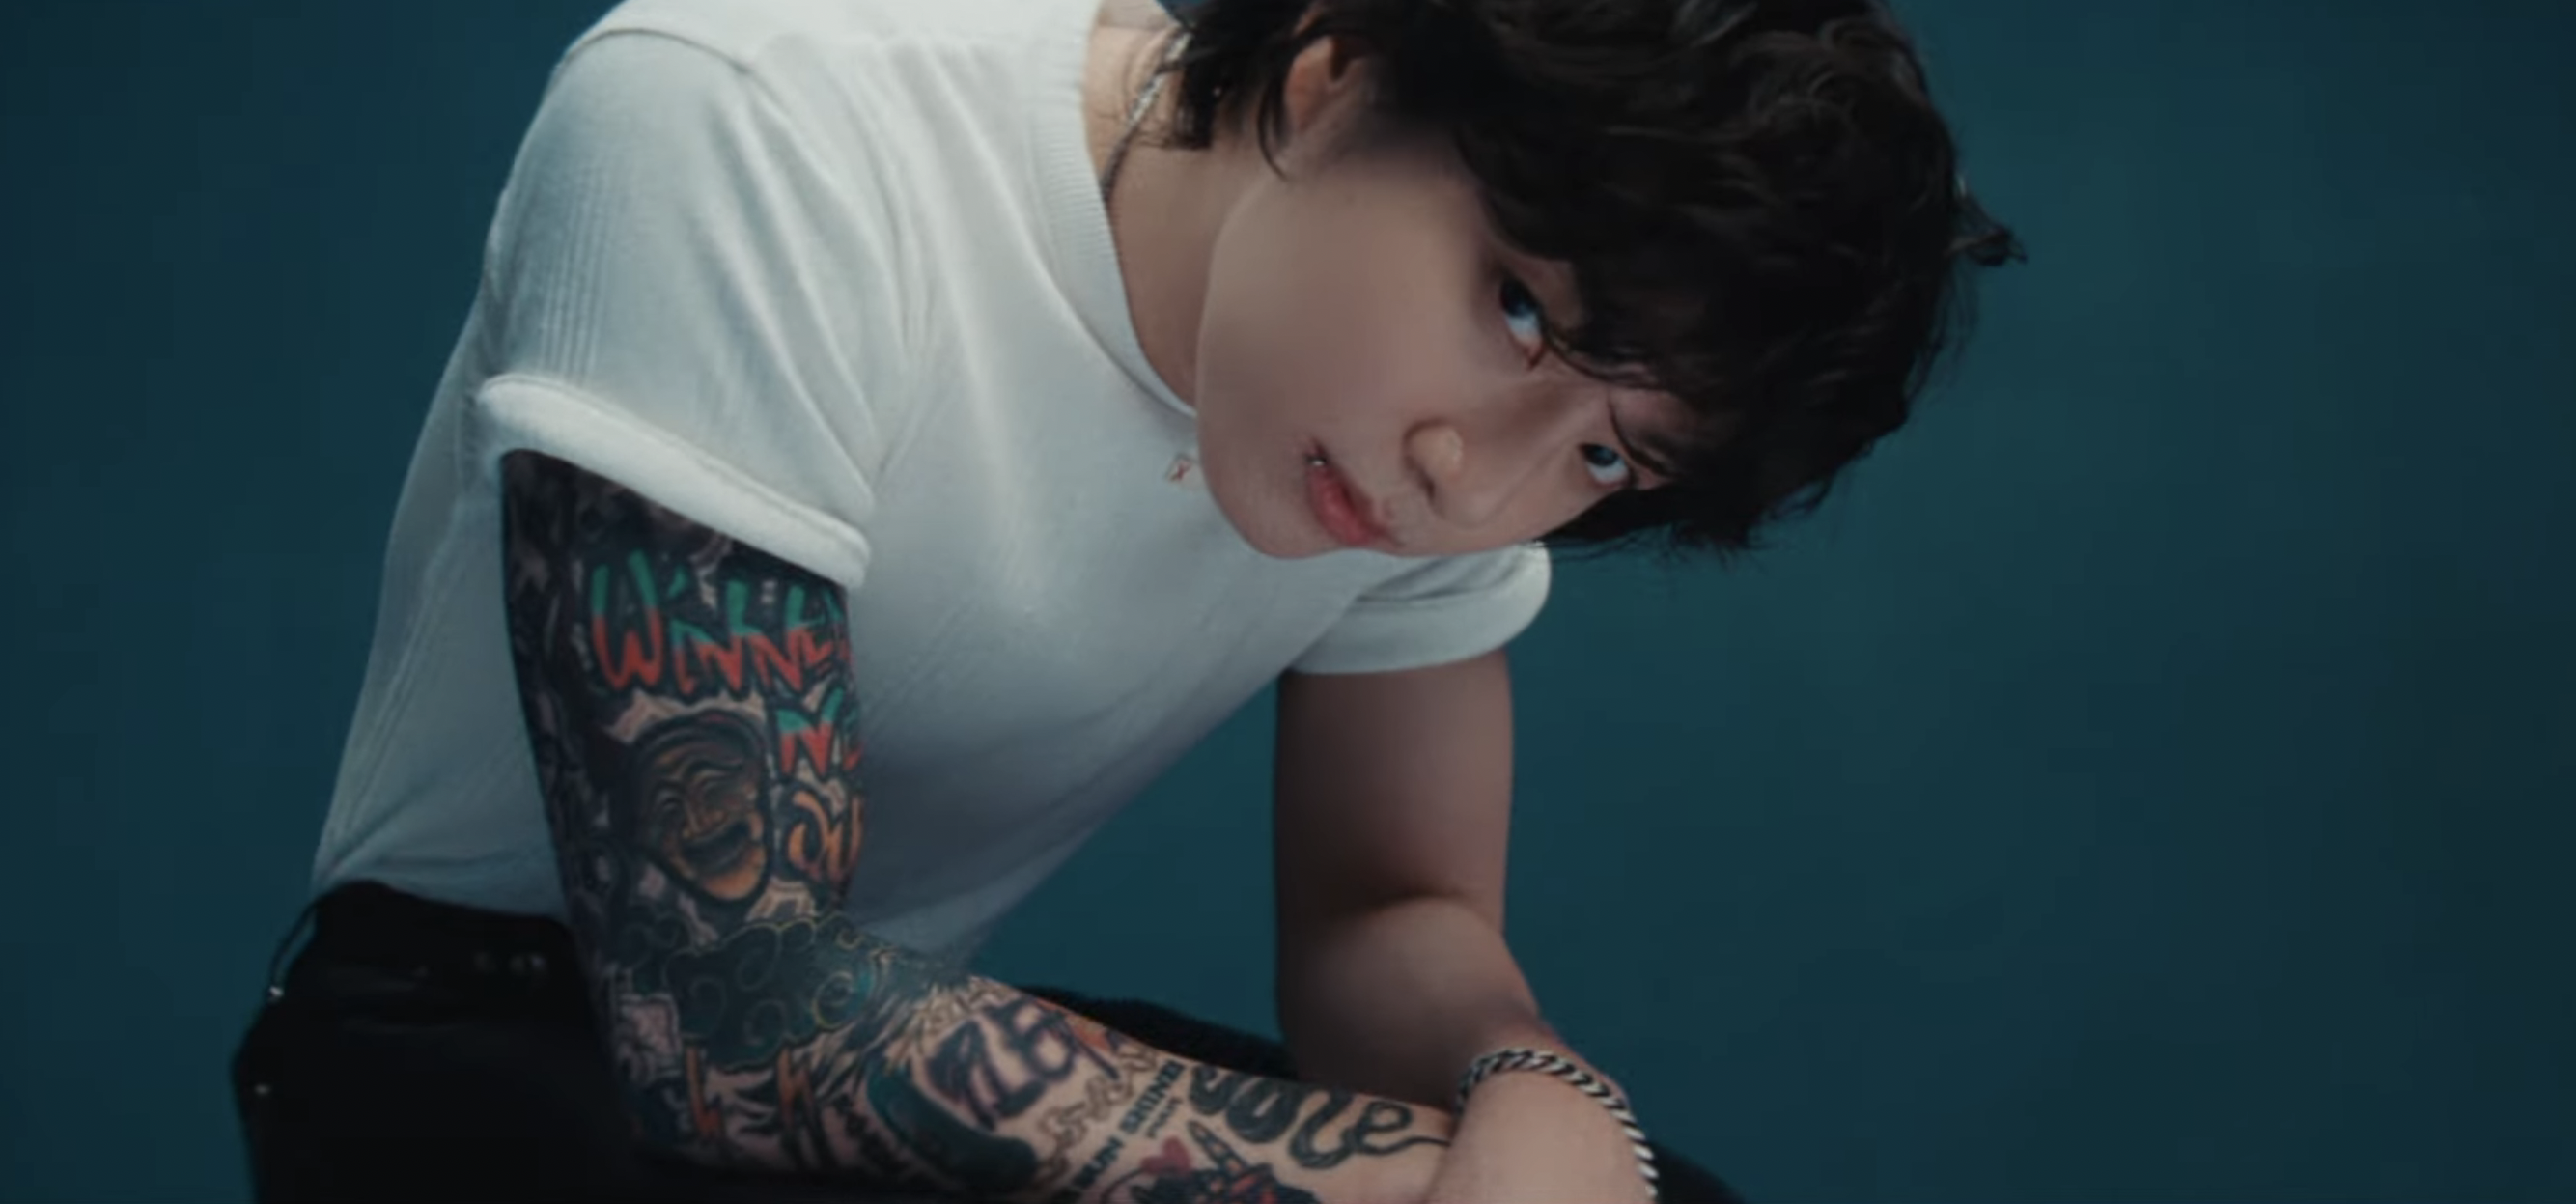 obsessed with jungkook's tattoos 😩 | Instagram